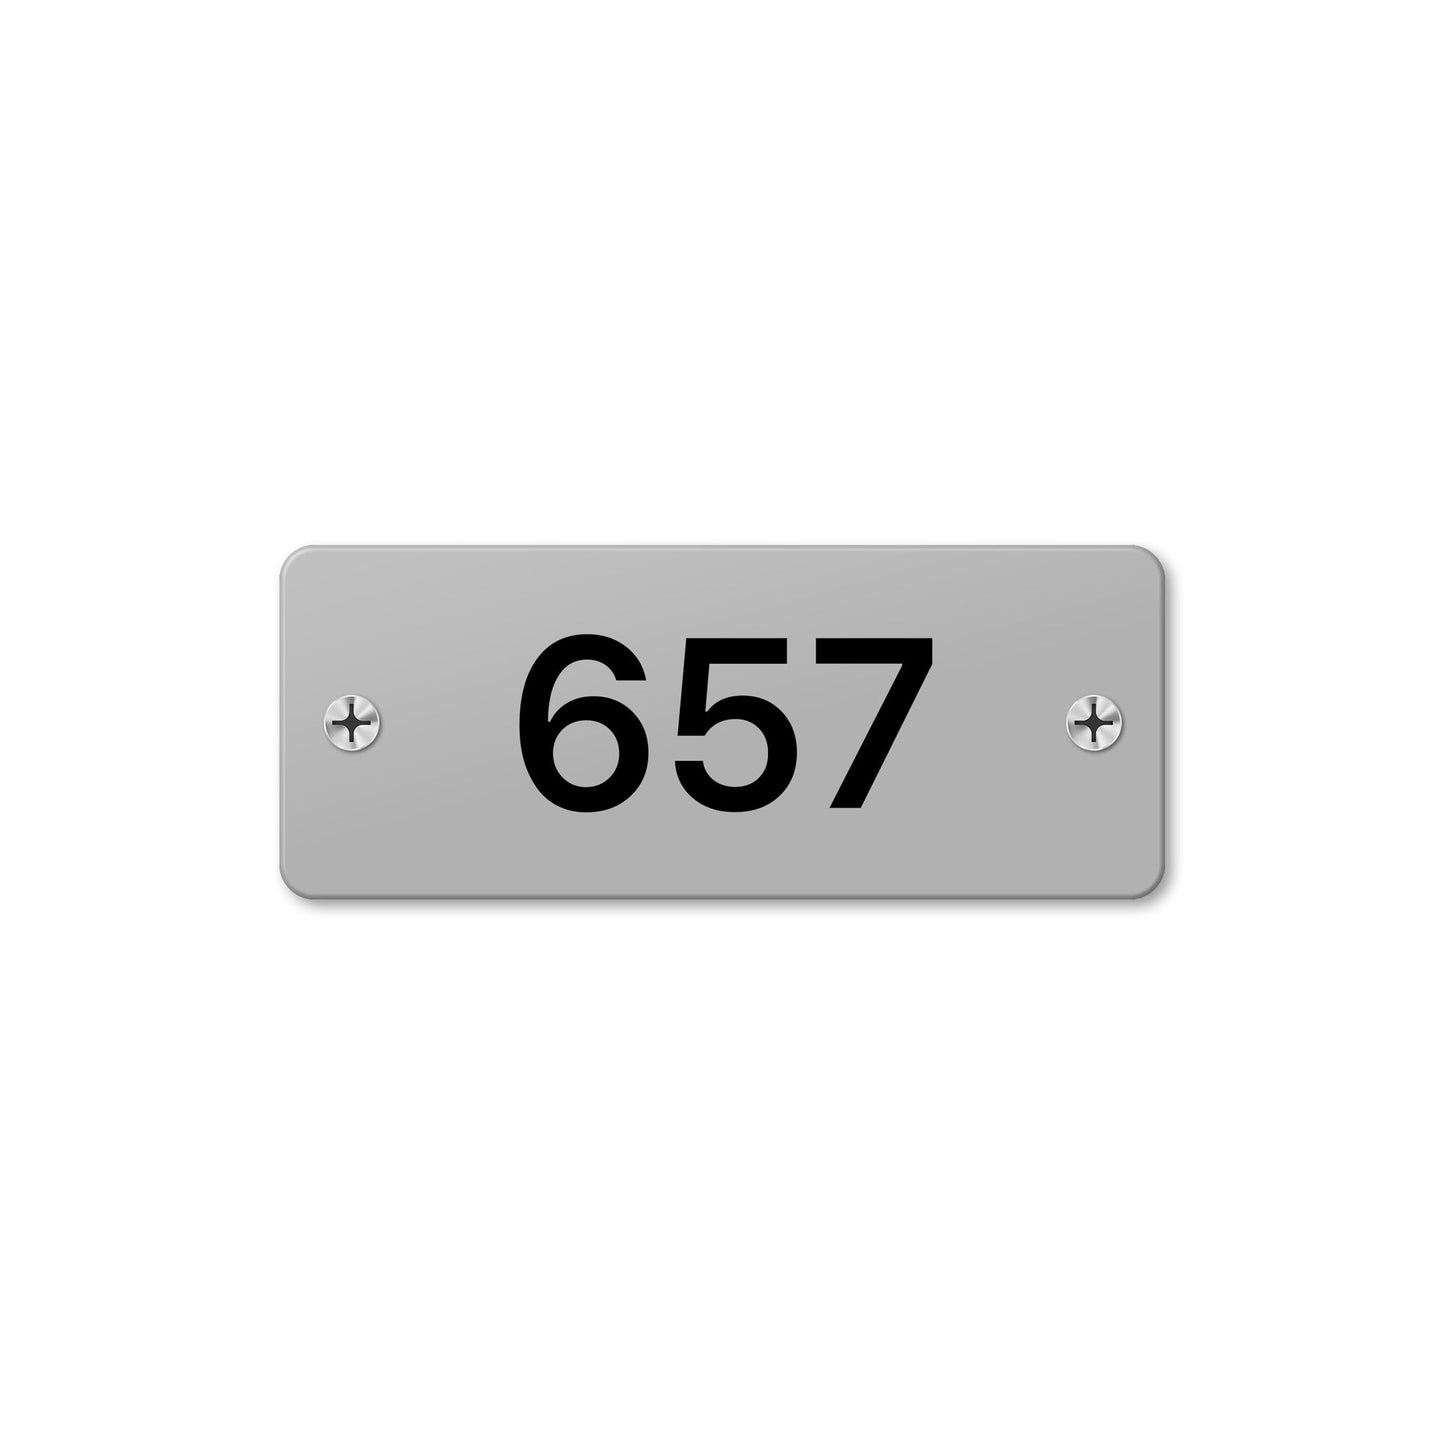 Numeral 657